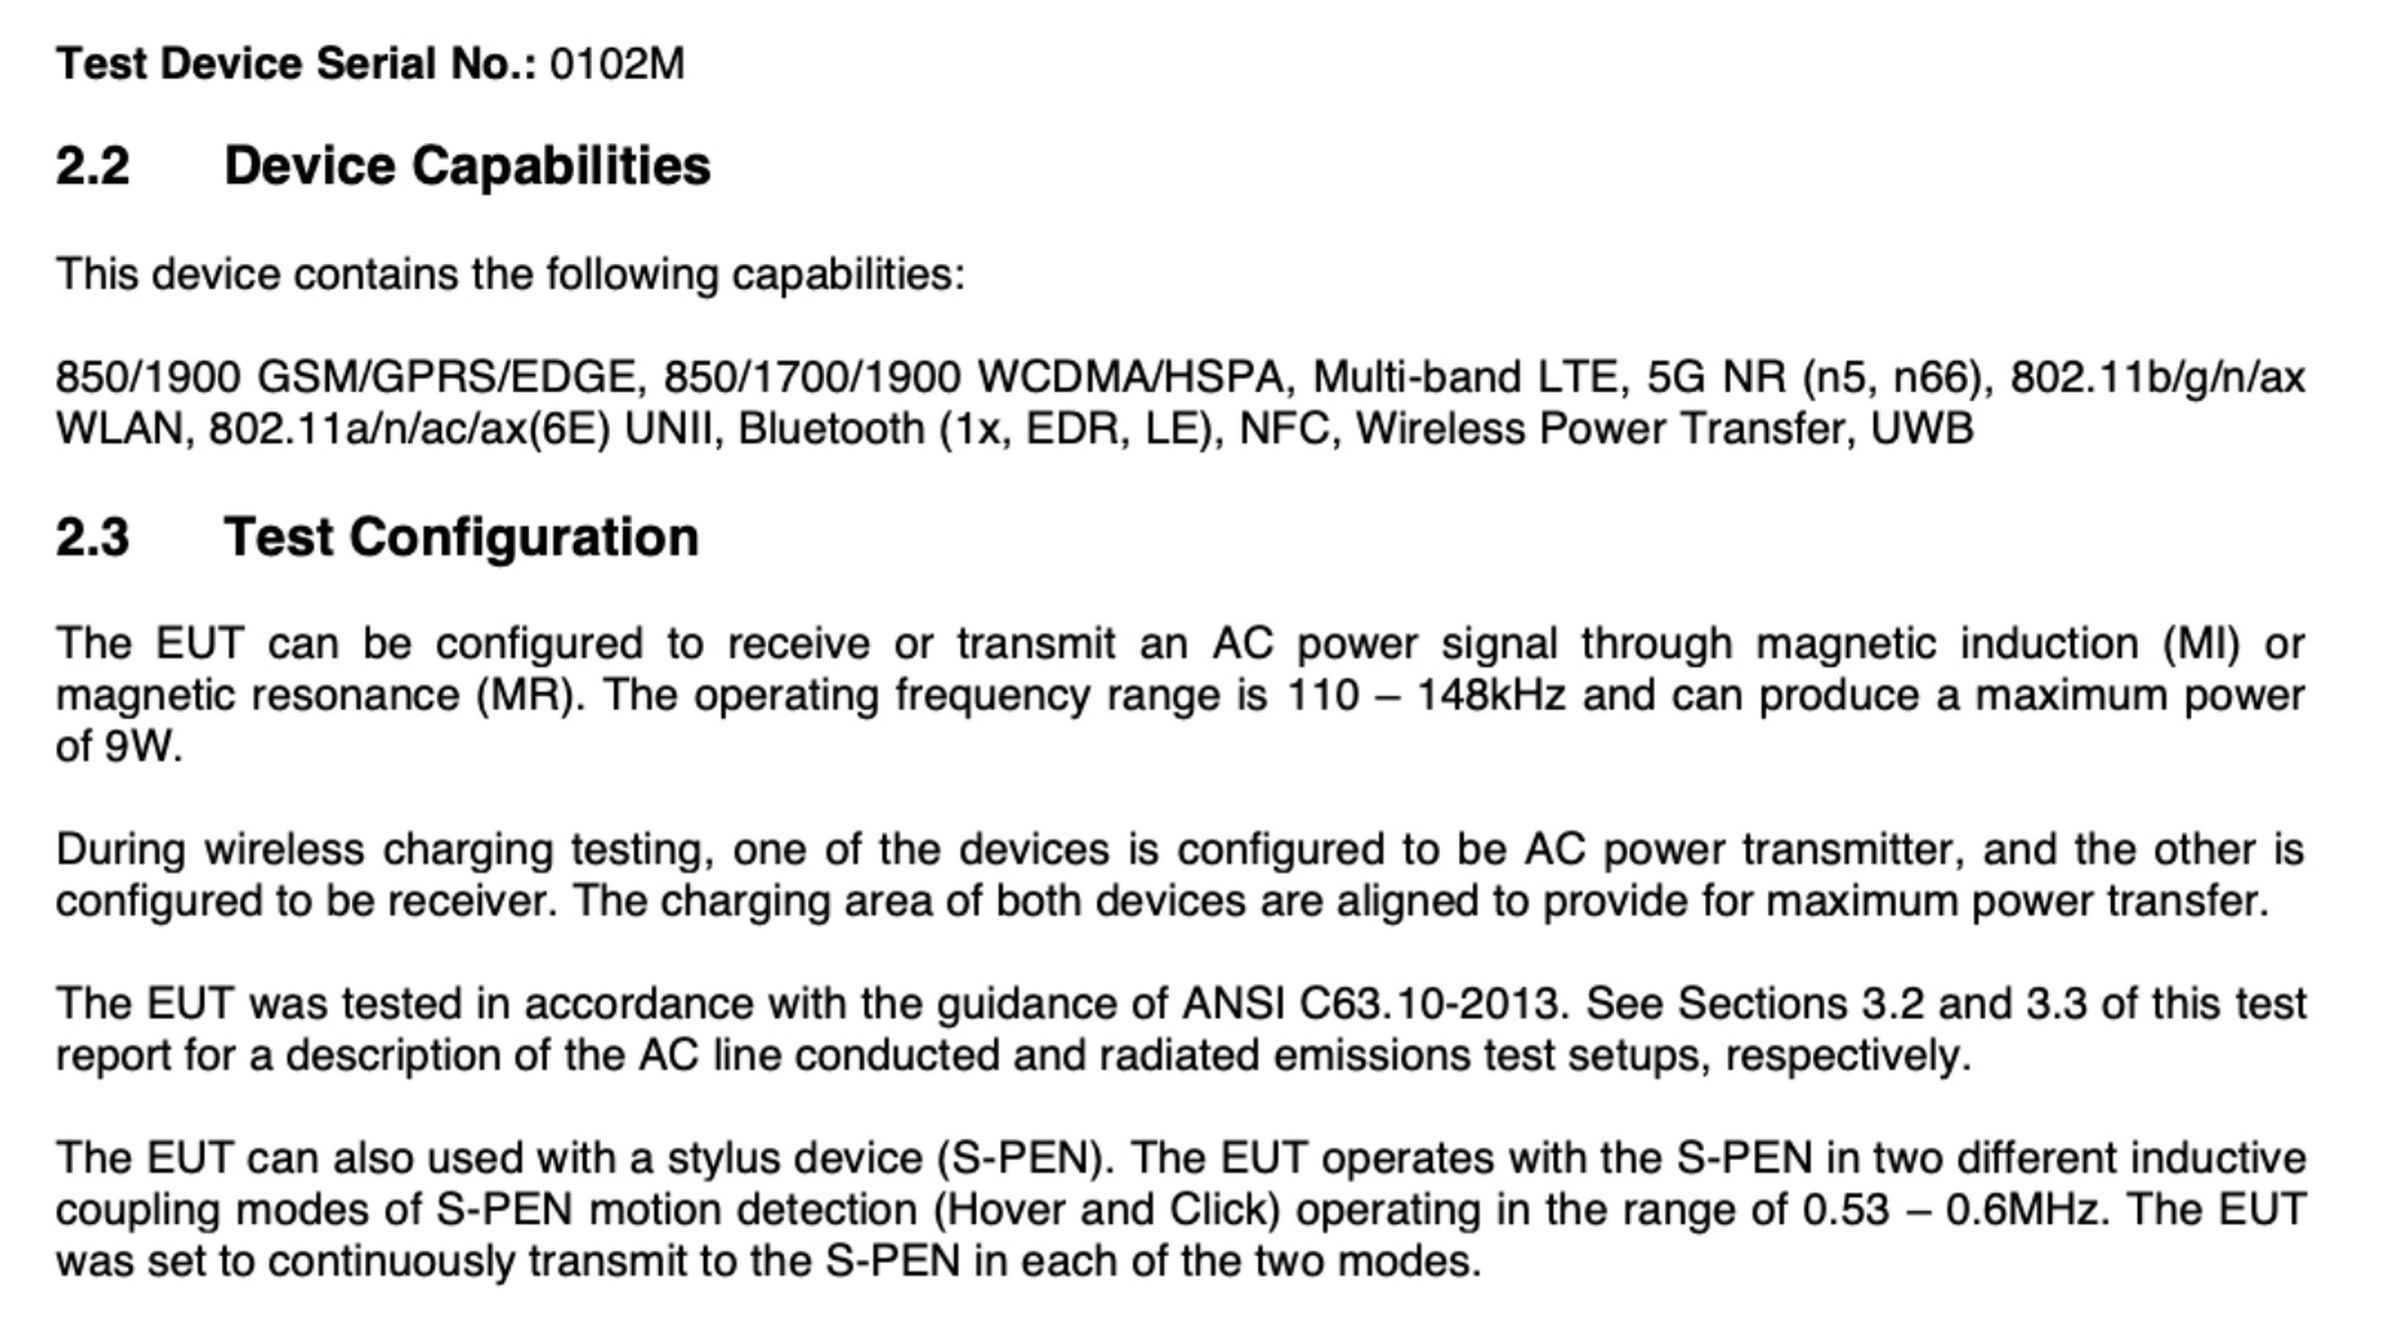 The relevant section of the FCC test report showing S-PEN support and other features.